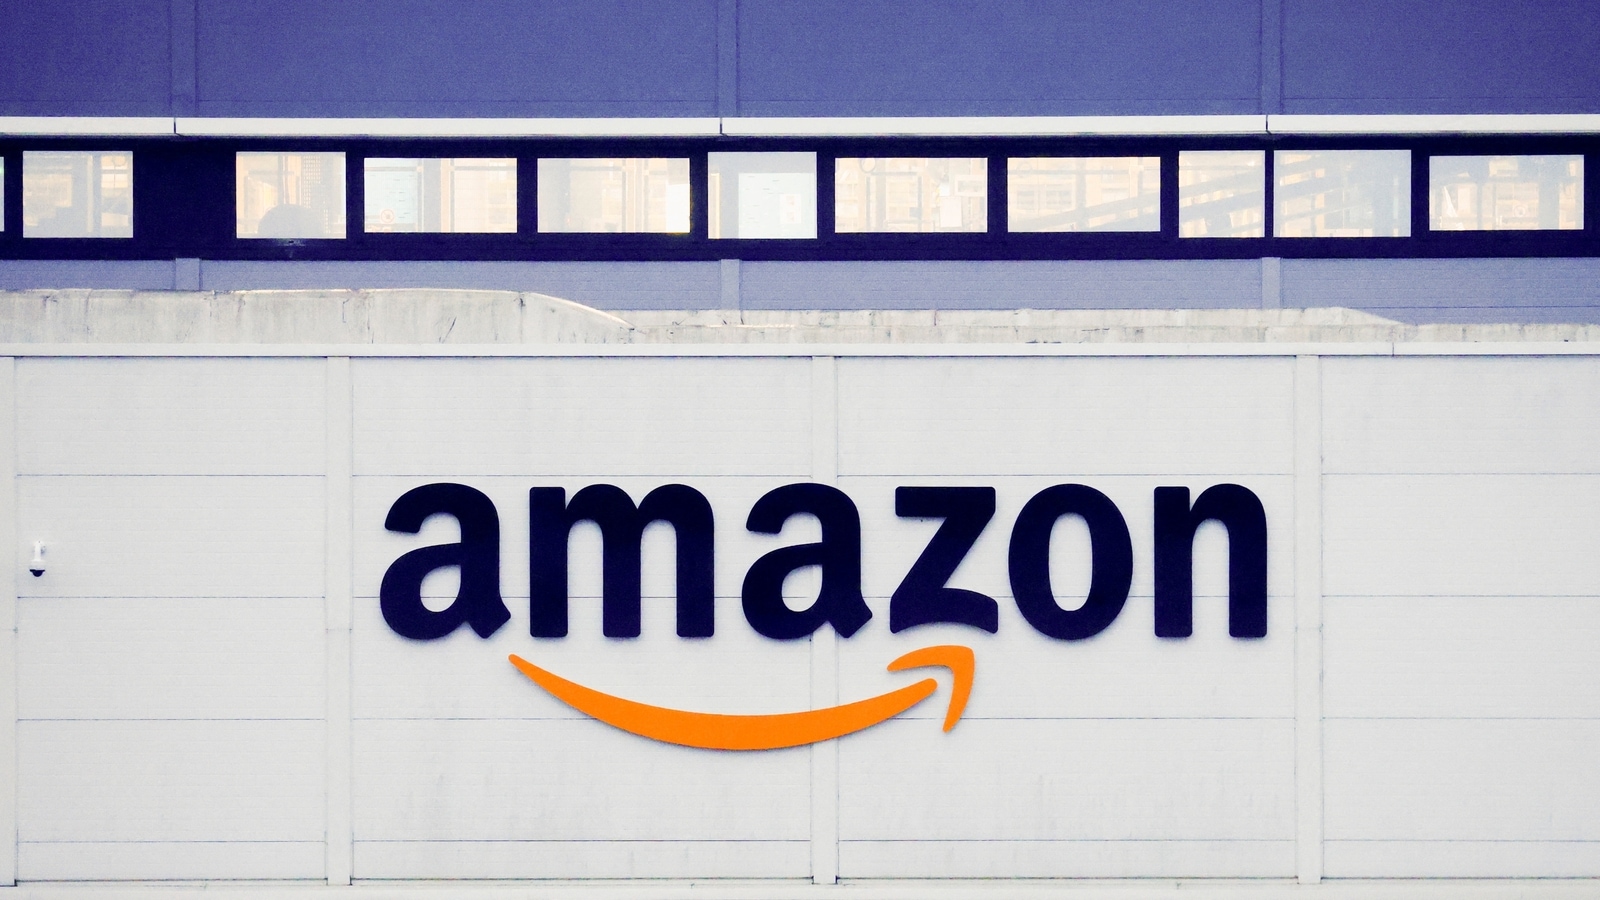 Big relief for staff! Amazon mobile phones ban in warehouses lifted ...